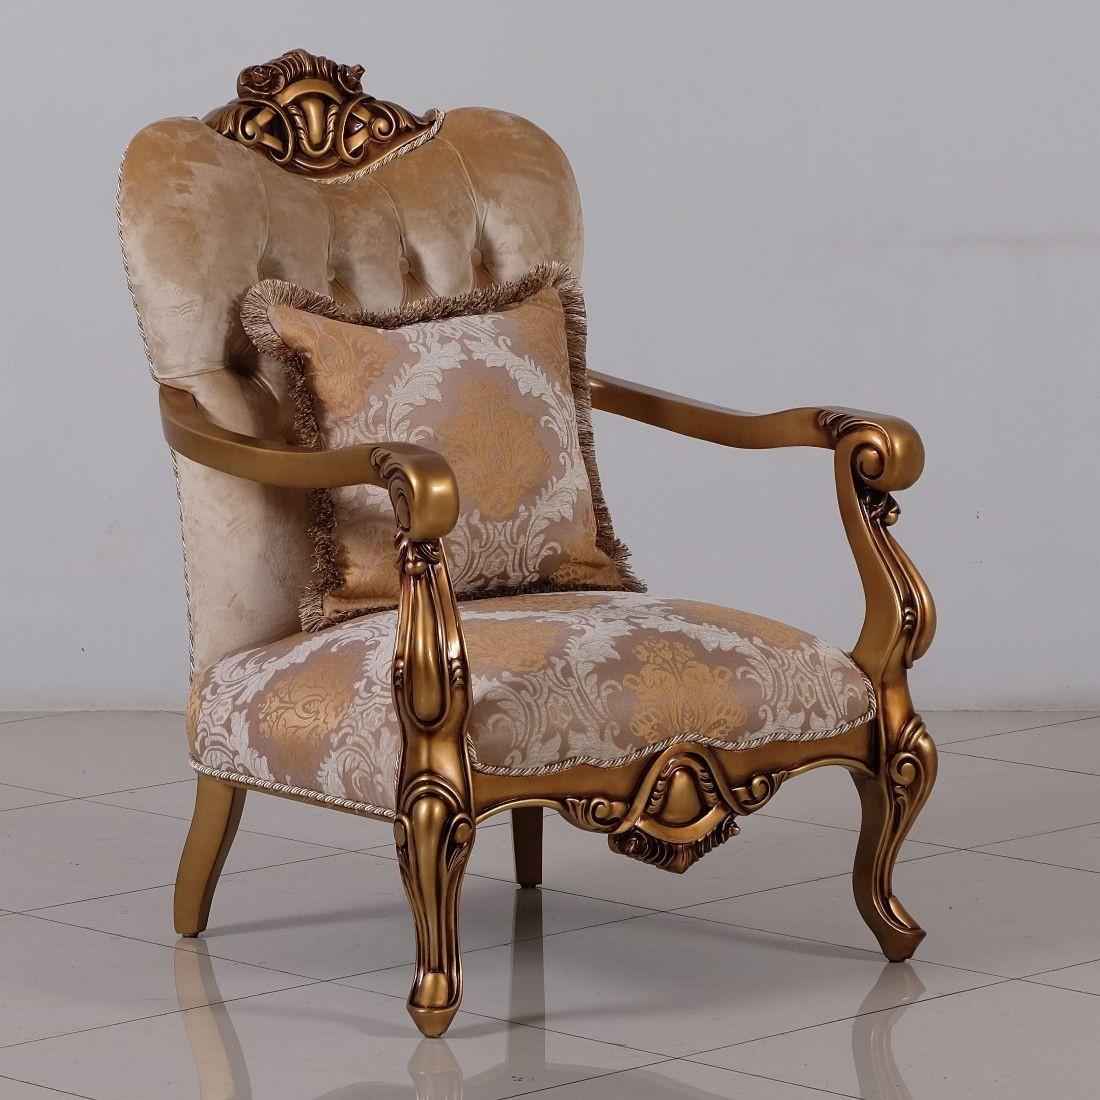 Classic, Traditional Arm Chair GOLDEN KNIGHTS 4590-C in Gold, Bronze, Beige Fabric